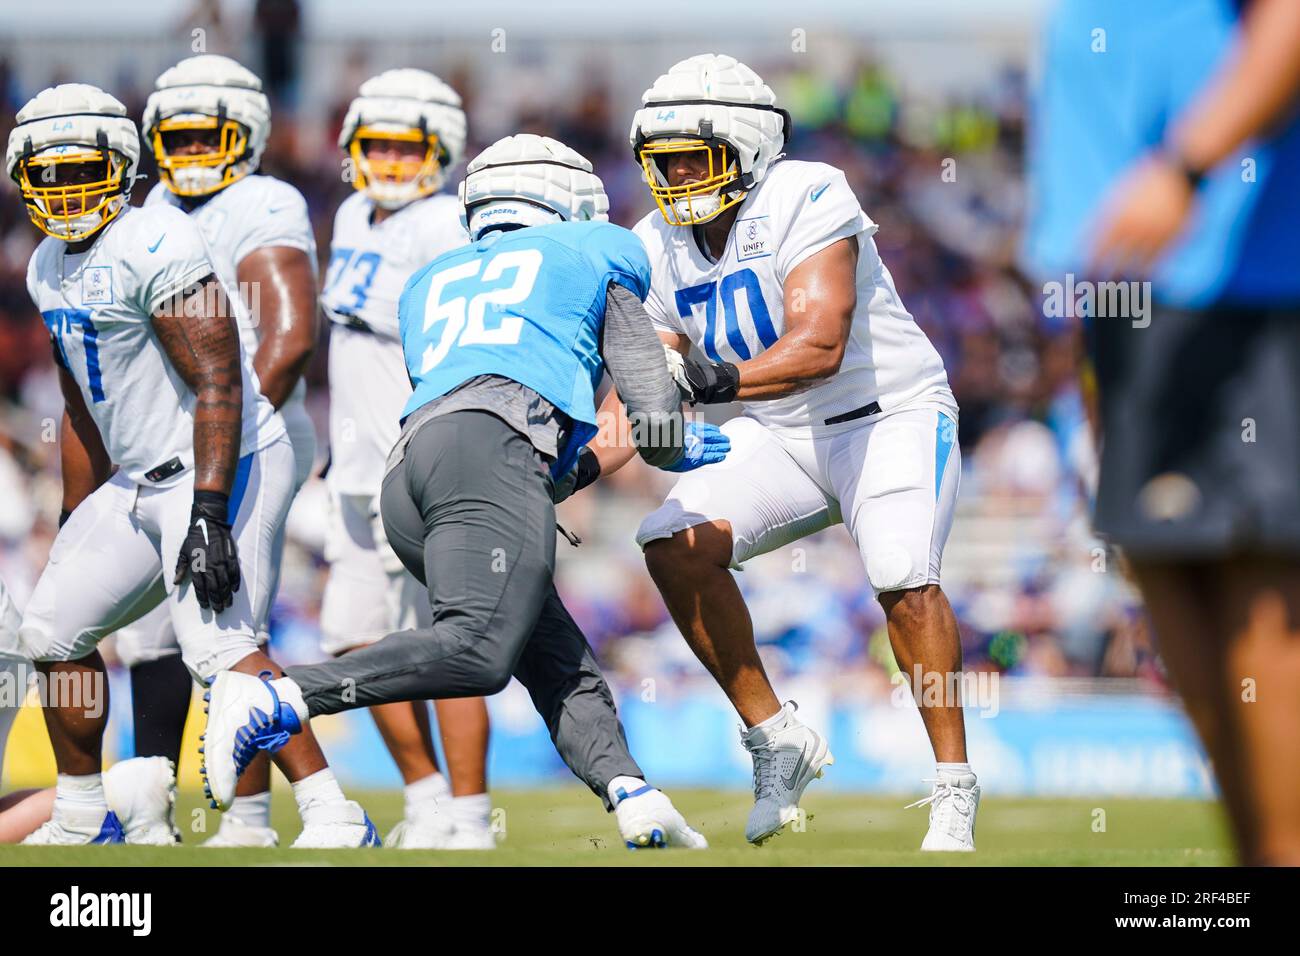 Los Angeles Chargers offensive tackle Rashawn Slater (70) and linebacker  Khalil Mack (52) participate in drills